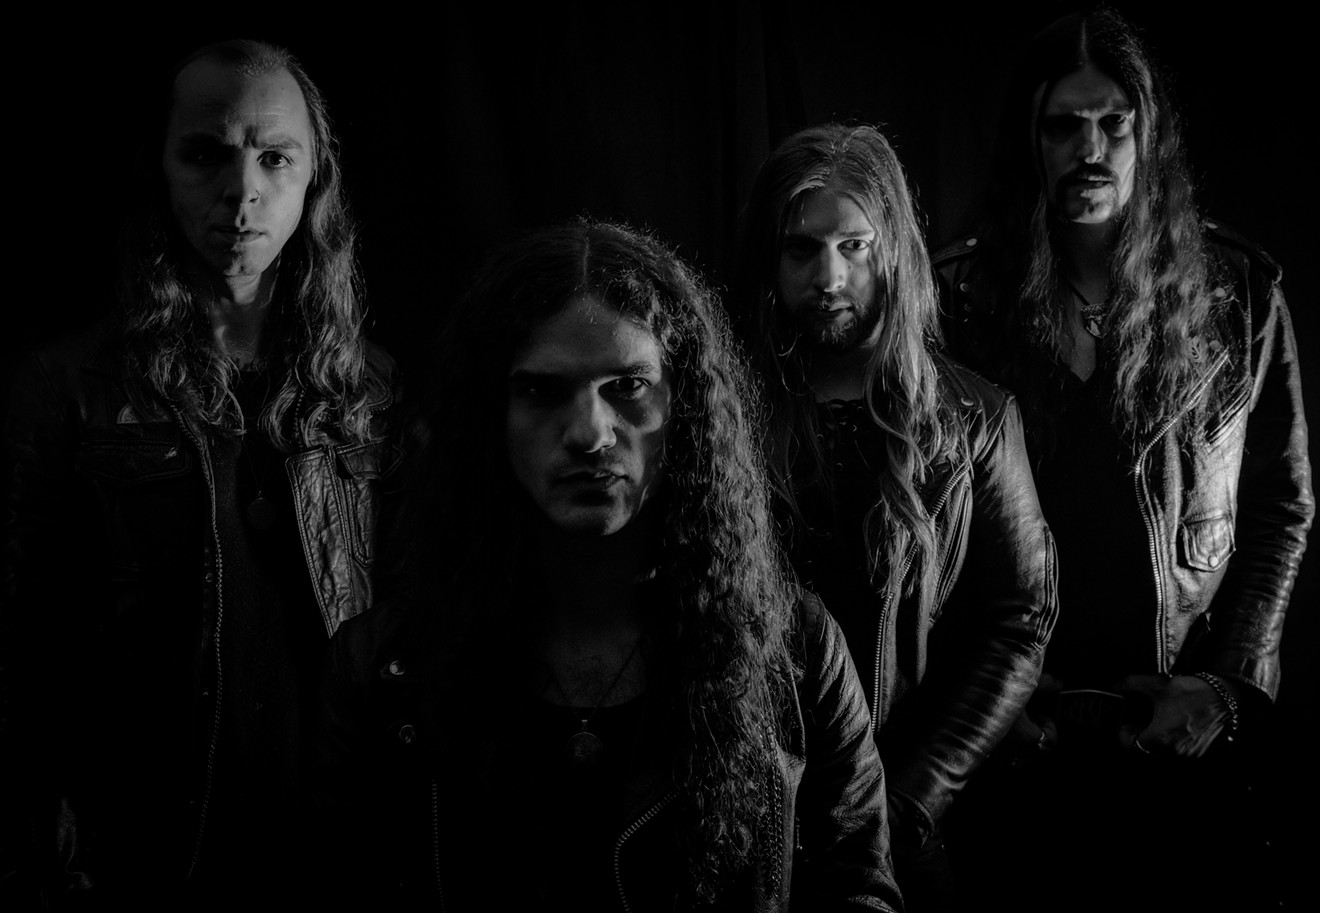 Cloak is ready to win you over with its black metal sound.